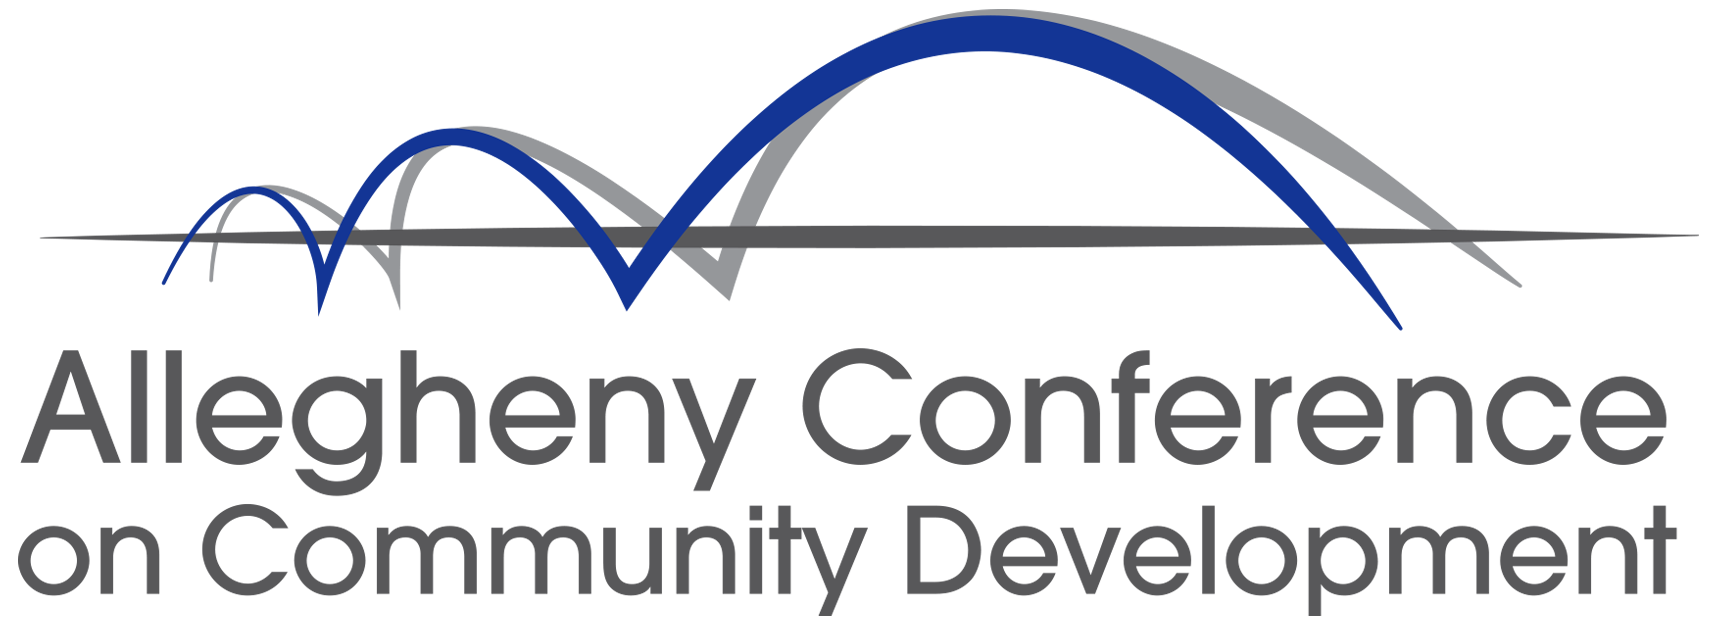 Allegheny Conference